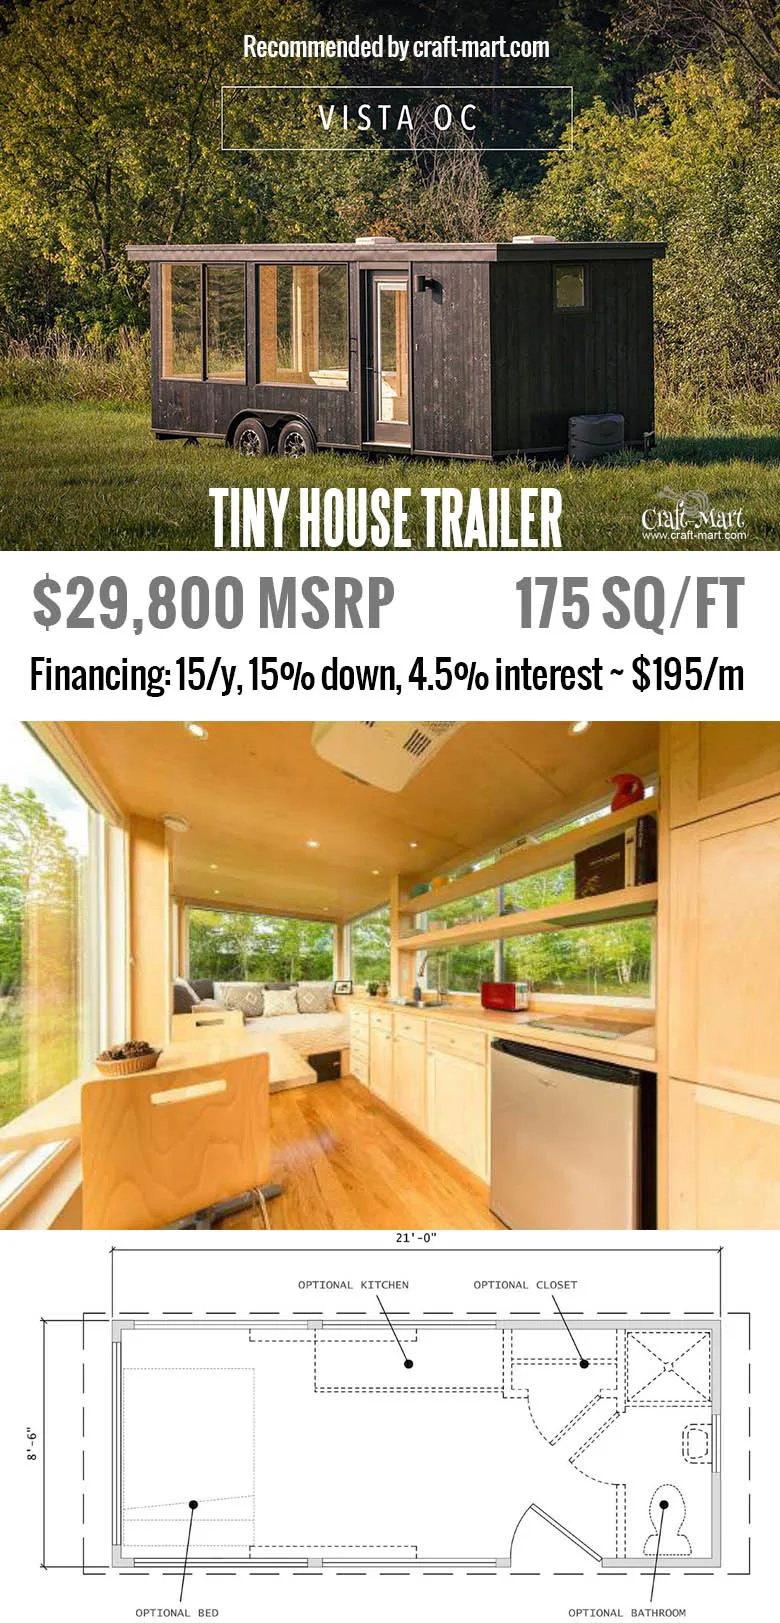 affordable tiny homes on wheels  - tiny house trailer interior